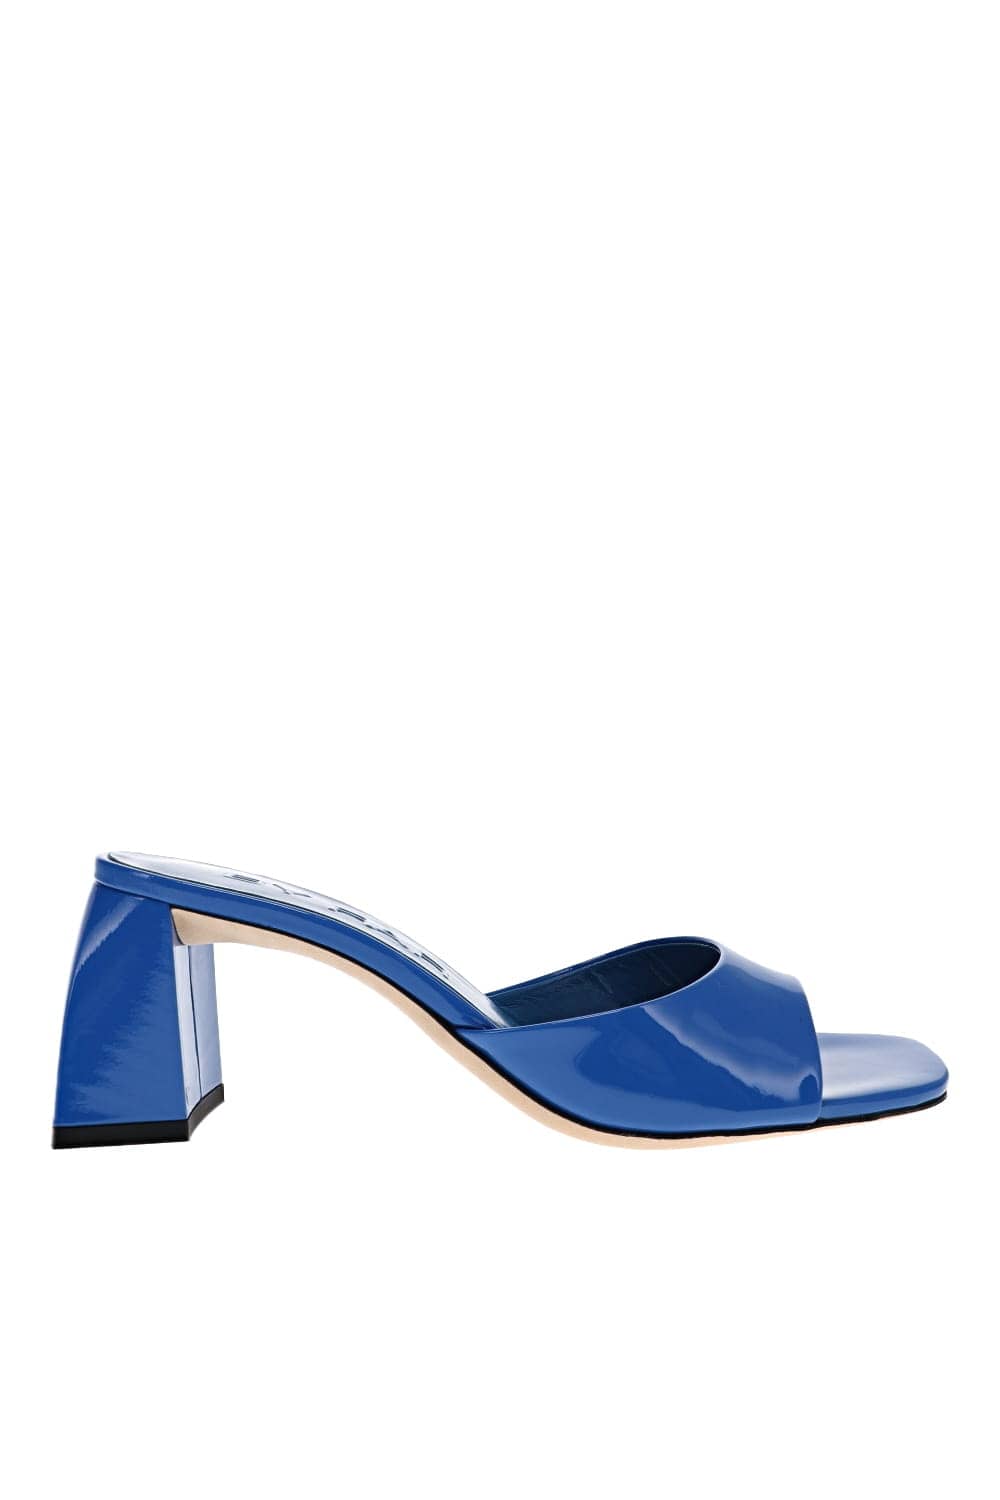 BY FAR Romy Cerulean Patent Leather Mules